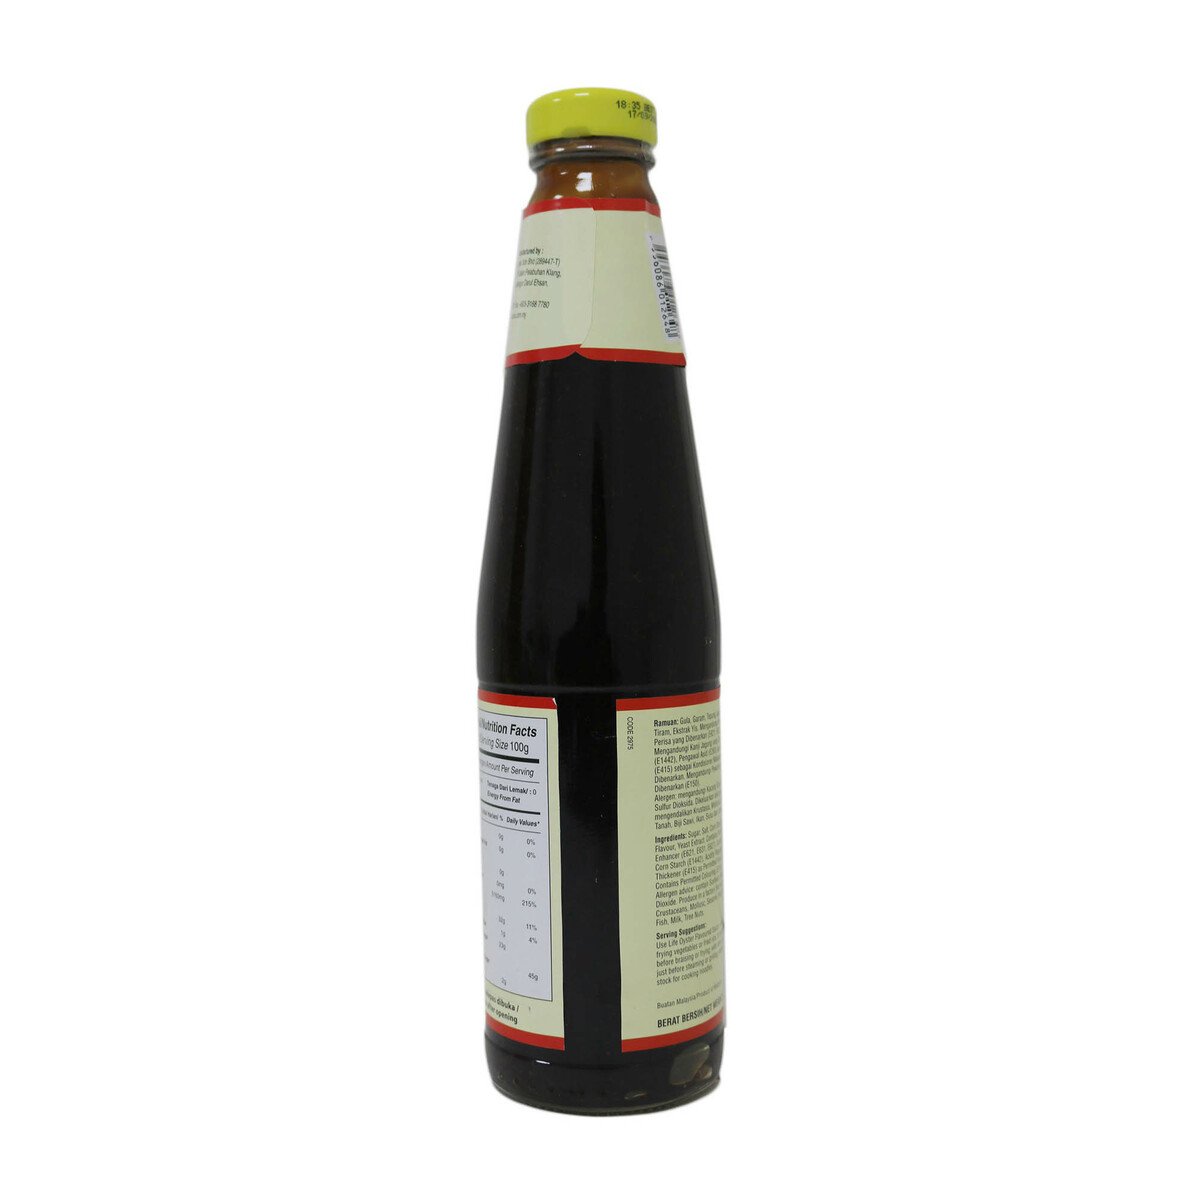 Life Oyster Flavour Sauce 510g